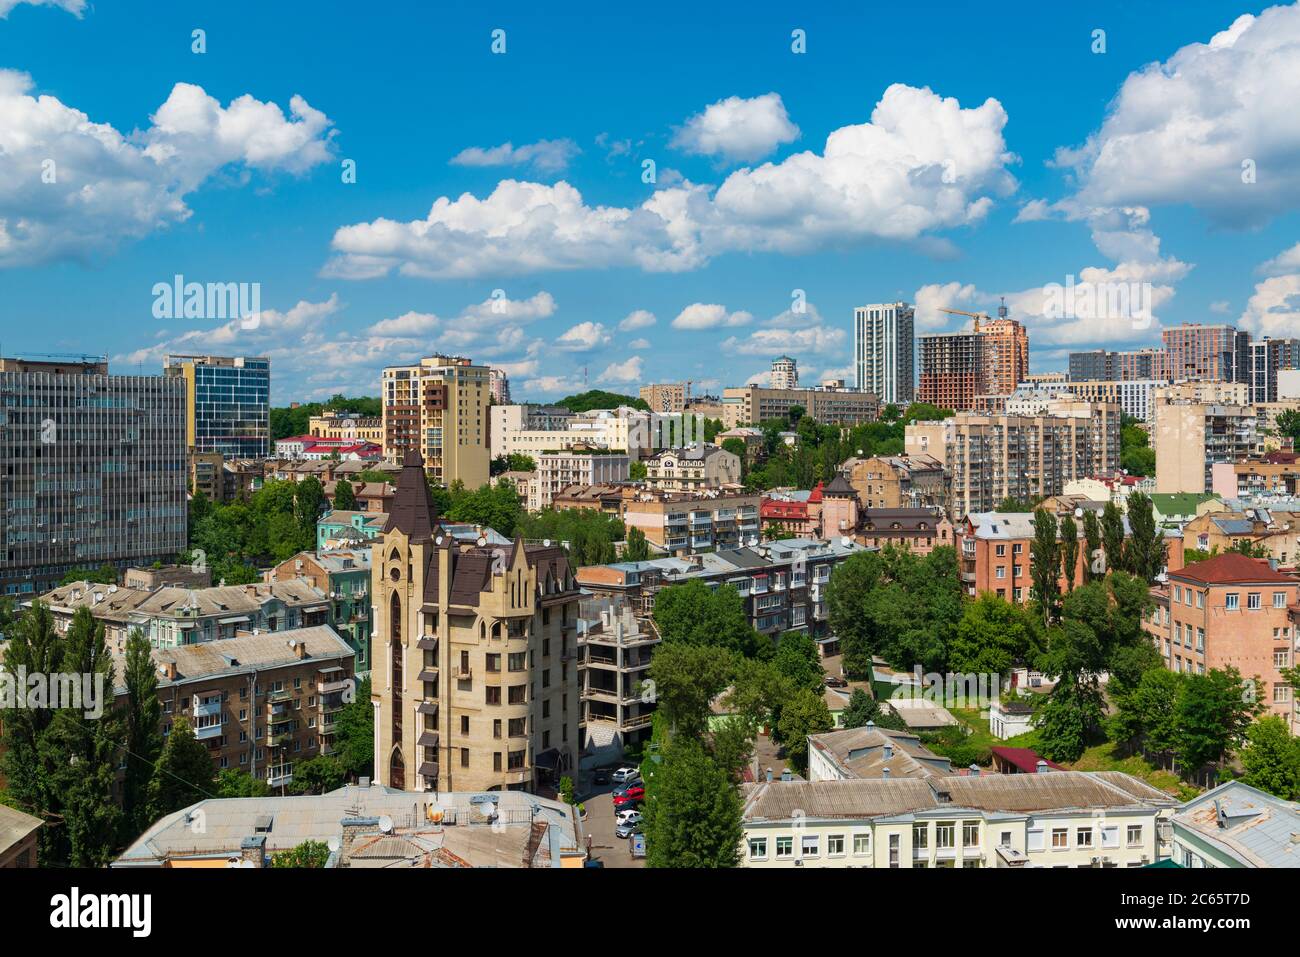 Kyiv cityscape panorama in a hot summer day. Old and modern buildings in Kiev, Ukraine Stock Photo